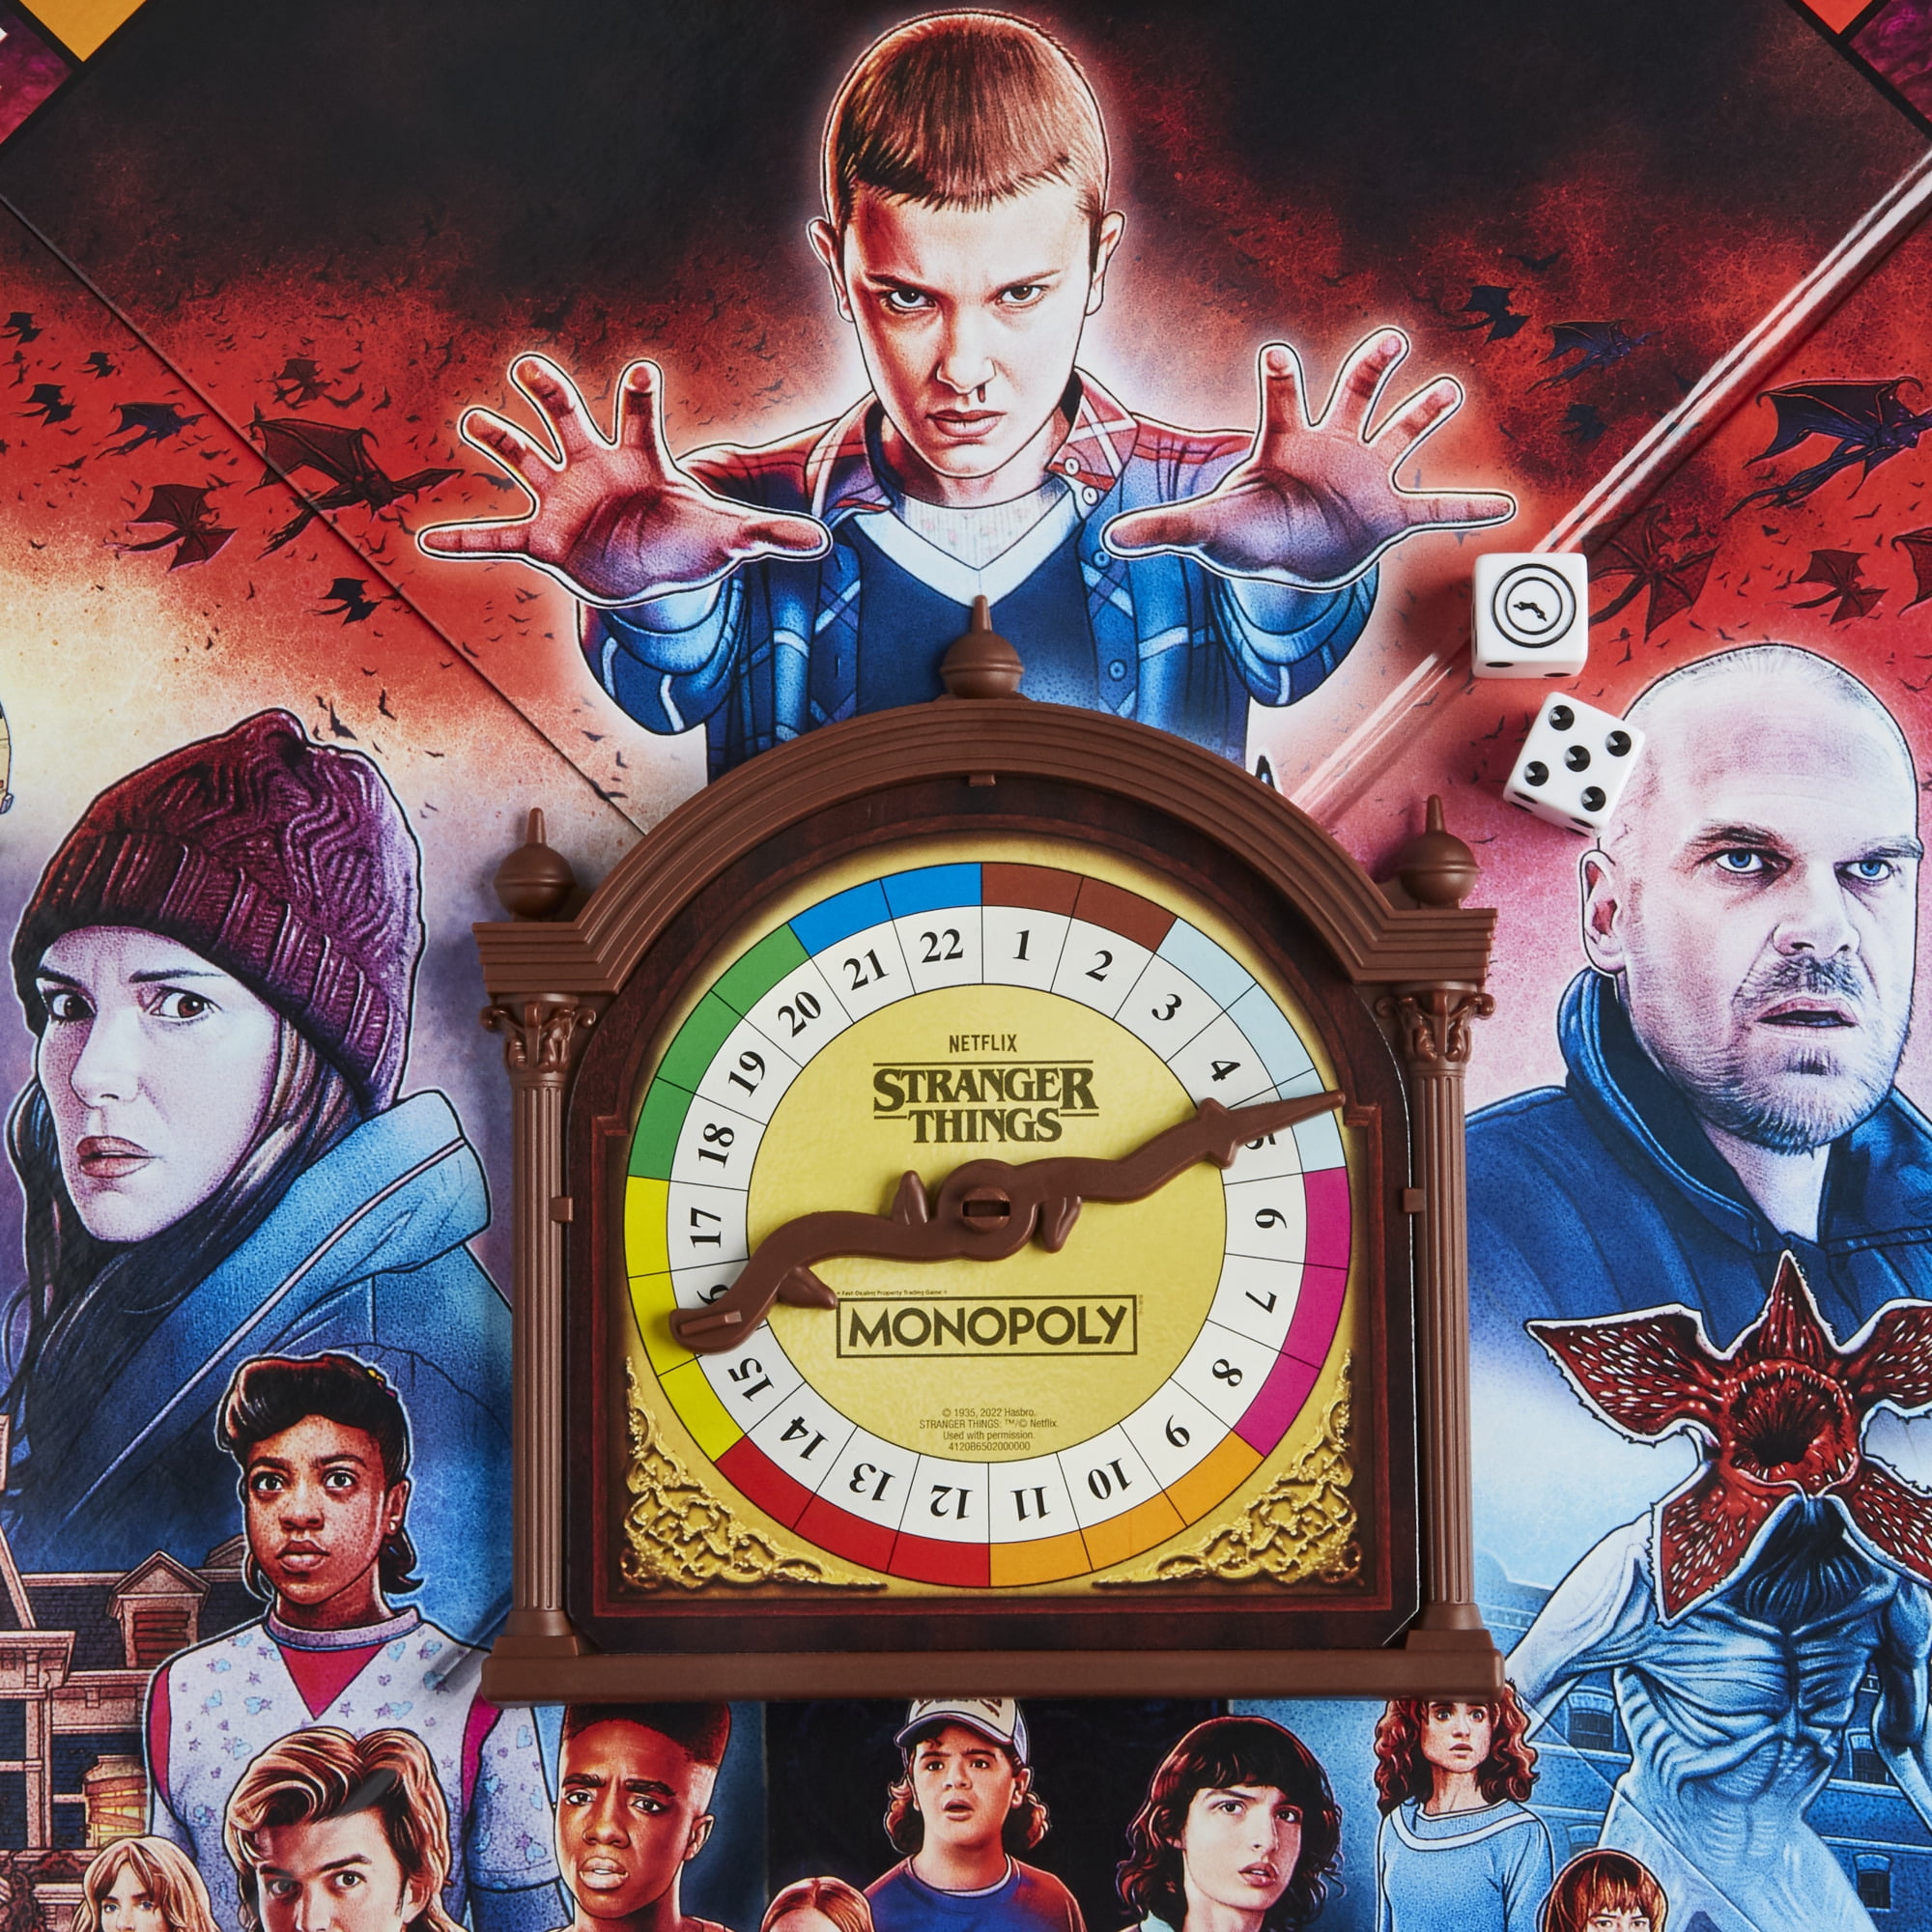  Monopoly: Netflix Stranger Things Edition Board Game for Adults  and Teens Ages 14+, Game for 2-6 Players, Inspired by Stranger Things  Season 4, Multicolor : Toys & Games